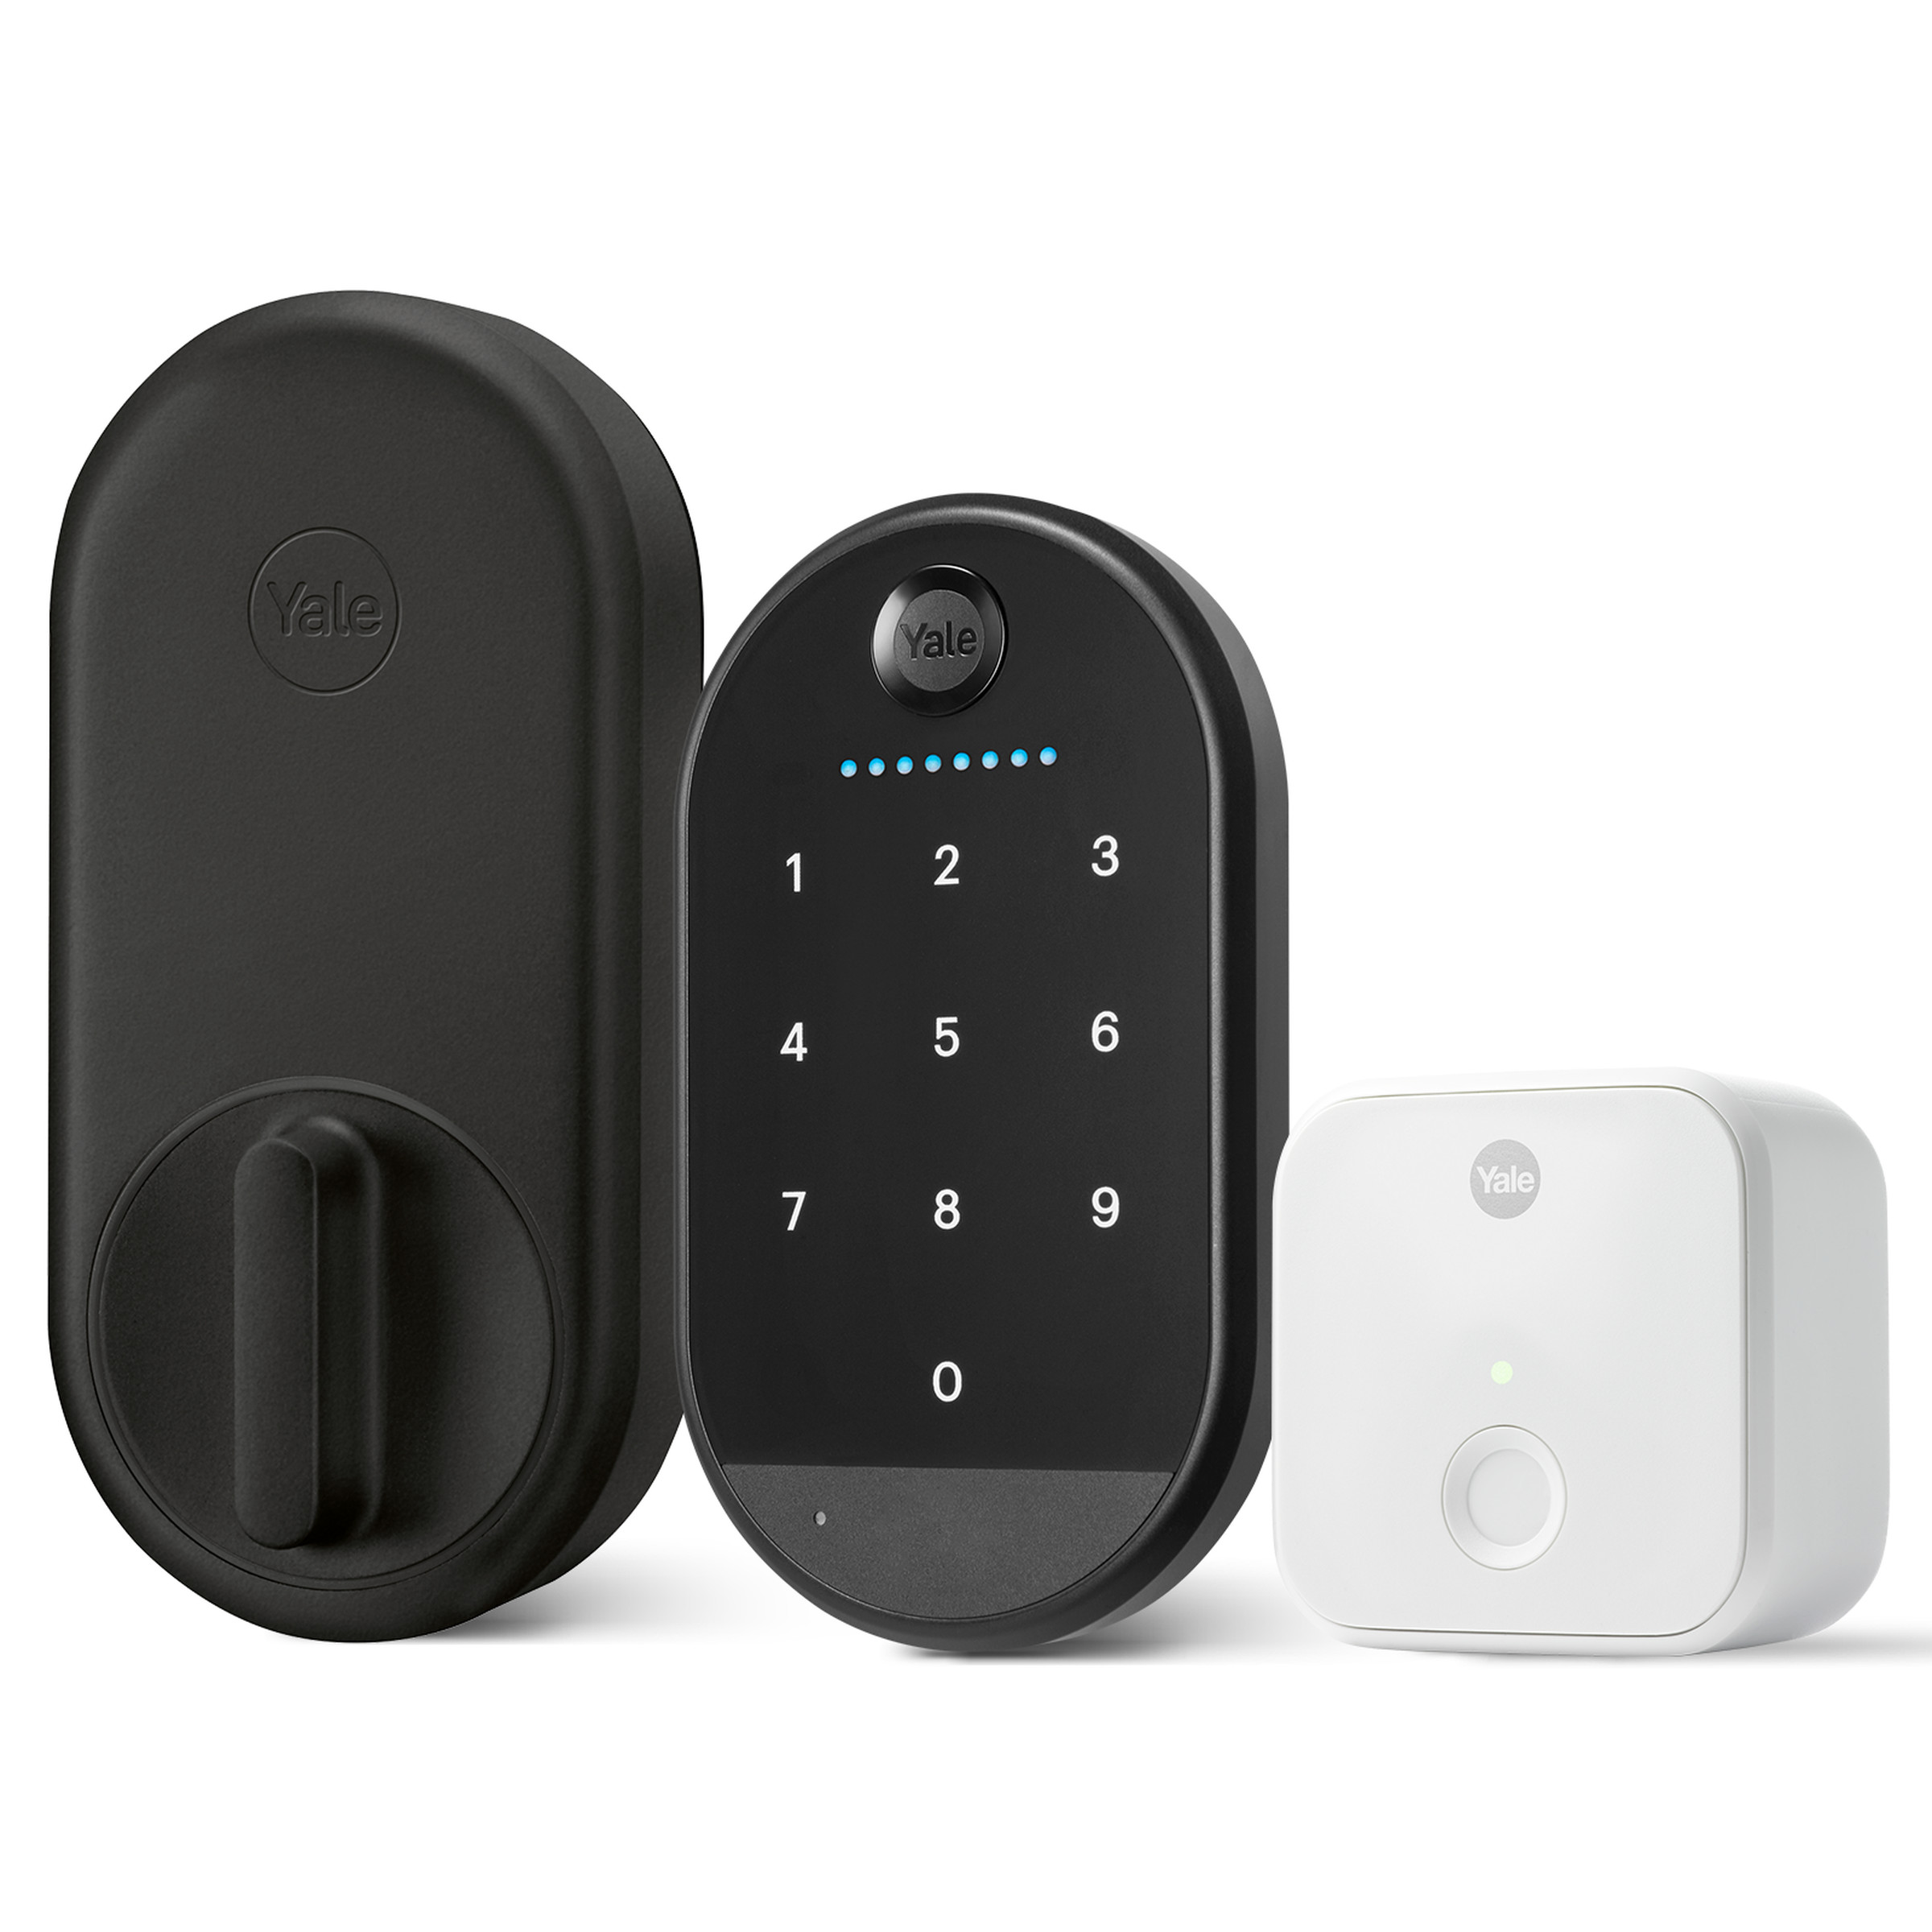 The Yale Approach lock is available in black or silver and comes with a Yale Connect module. The Yale Keypad is sold separately. It works over Bluetooth and has a range of 30 feet.